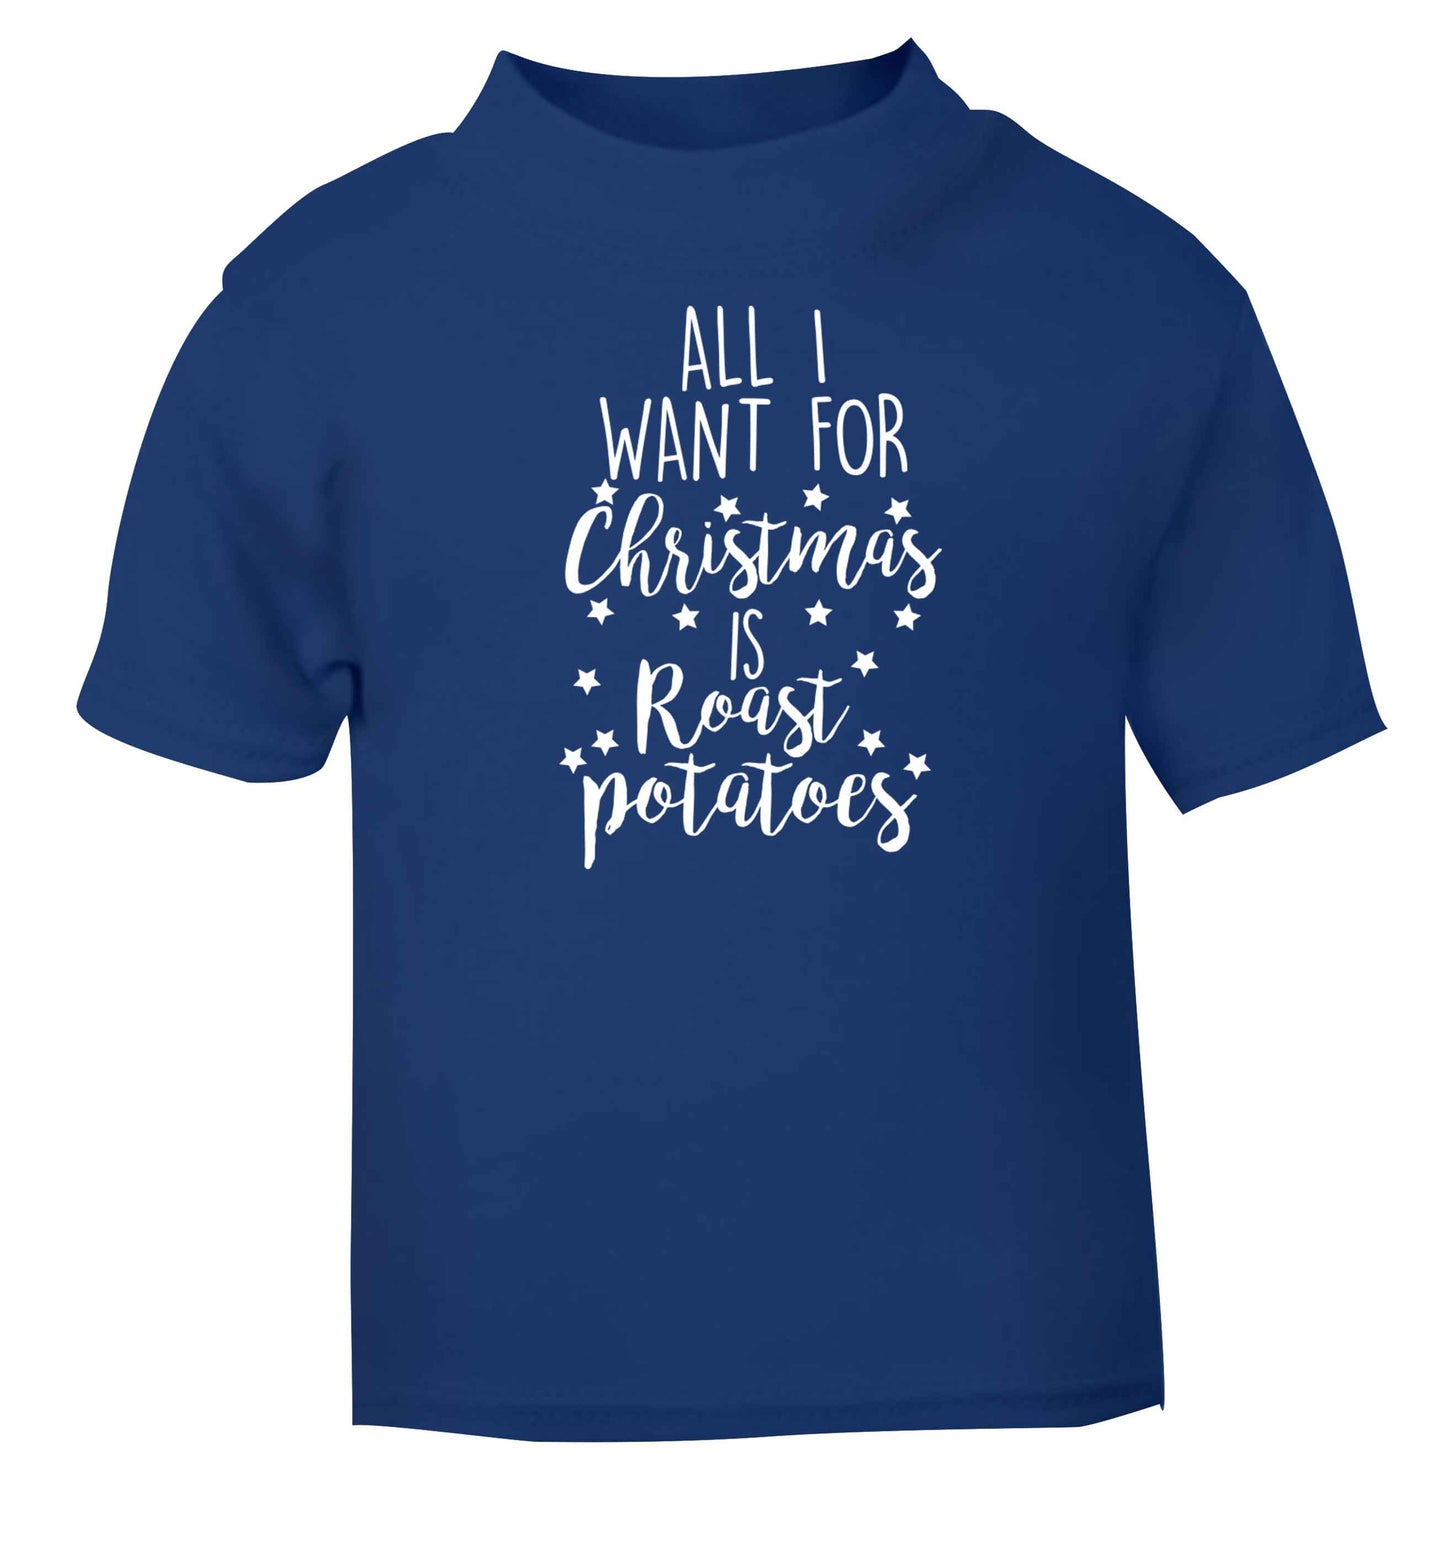 All I want for Christmas is roast potatoes blue baby toddler Tshirt 2 Years